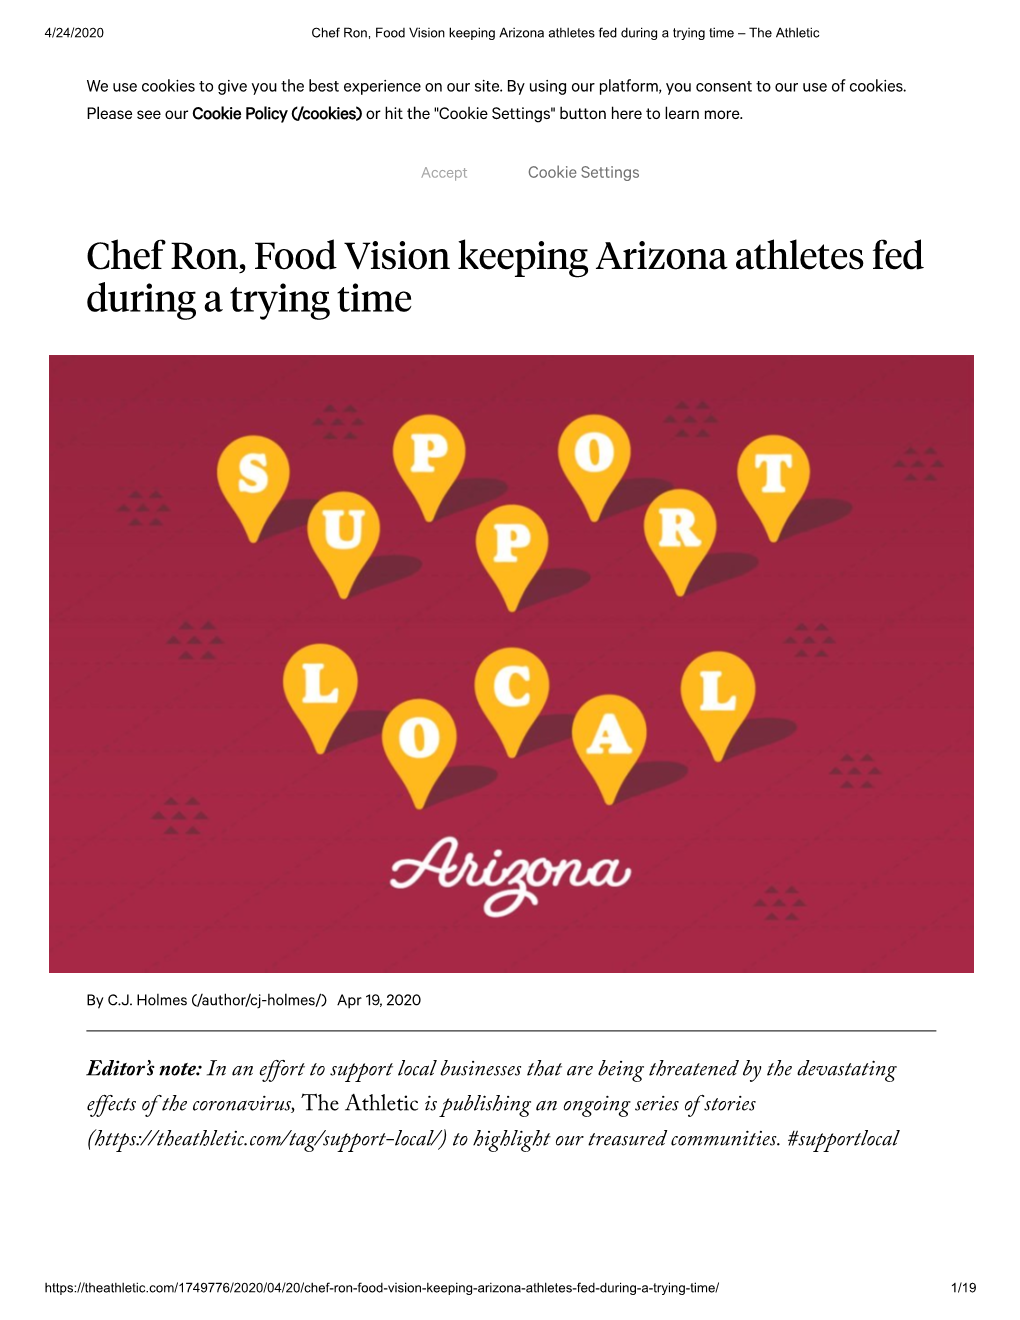 Chef Ron, Food Vision Keeping Arizona Athletes Fed During a Trying Time – the Athletic